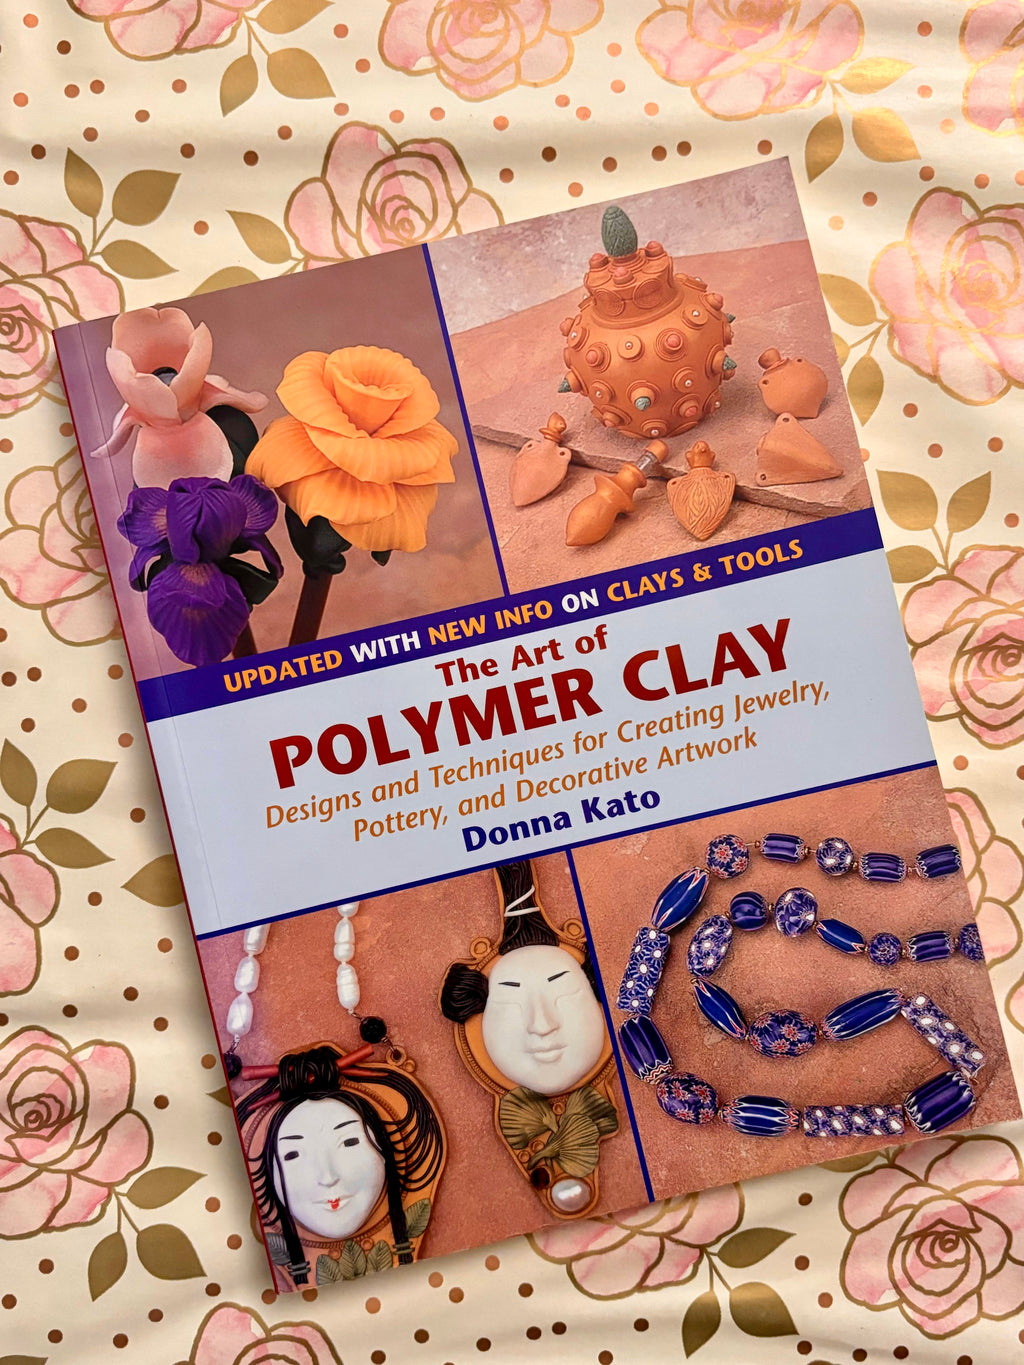 The Art of Polymer Clay: Designs and Techniques for Creating Jewelry, Pottery, and Decorative Artwork- By Donna Kato